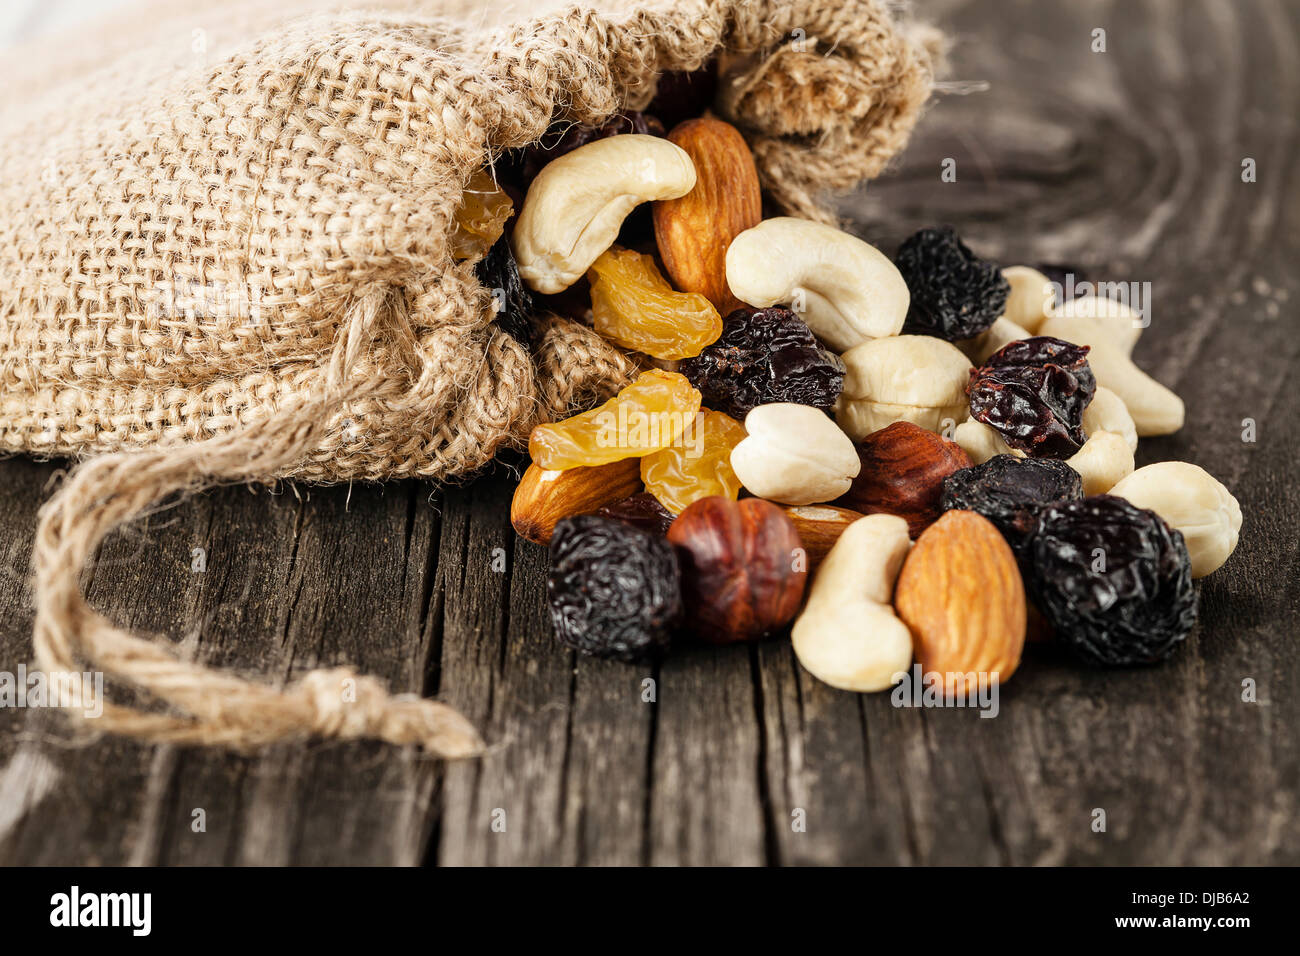 Nuts and dried fruits on wooden background Stock Photo